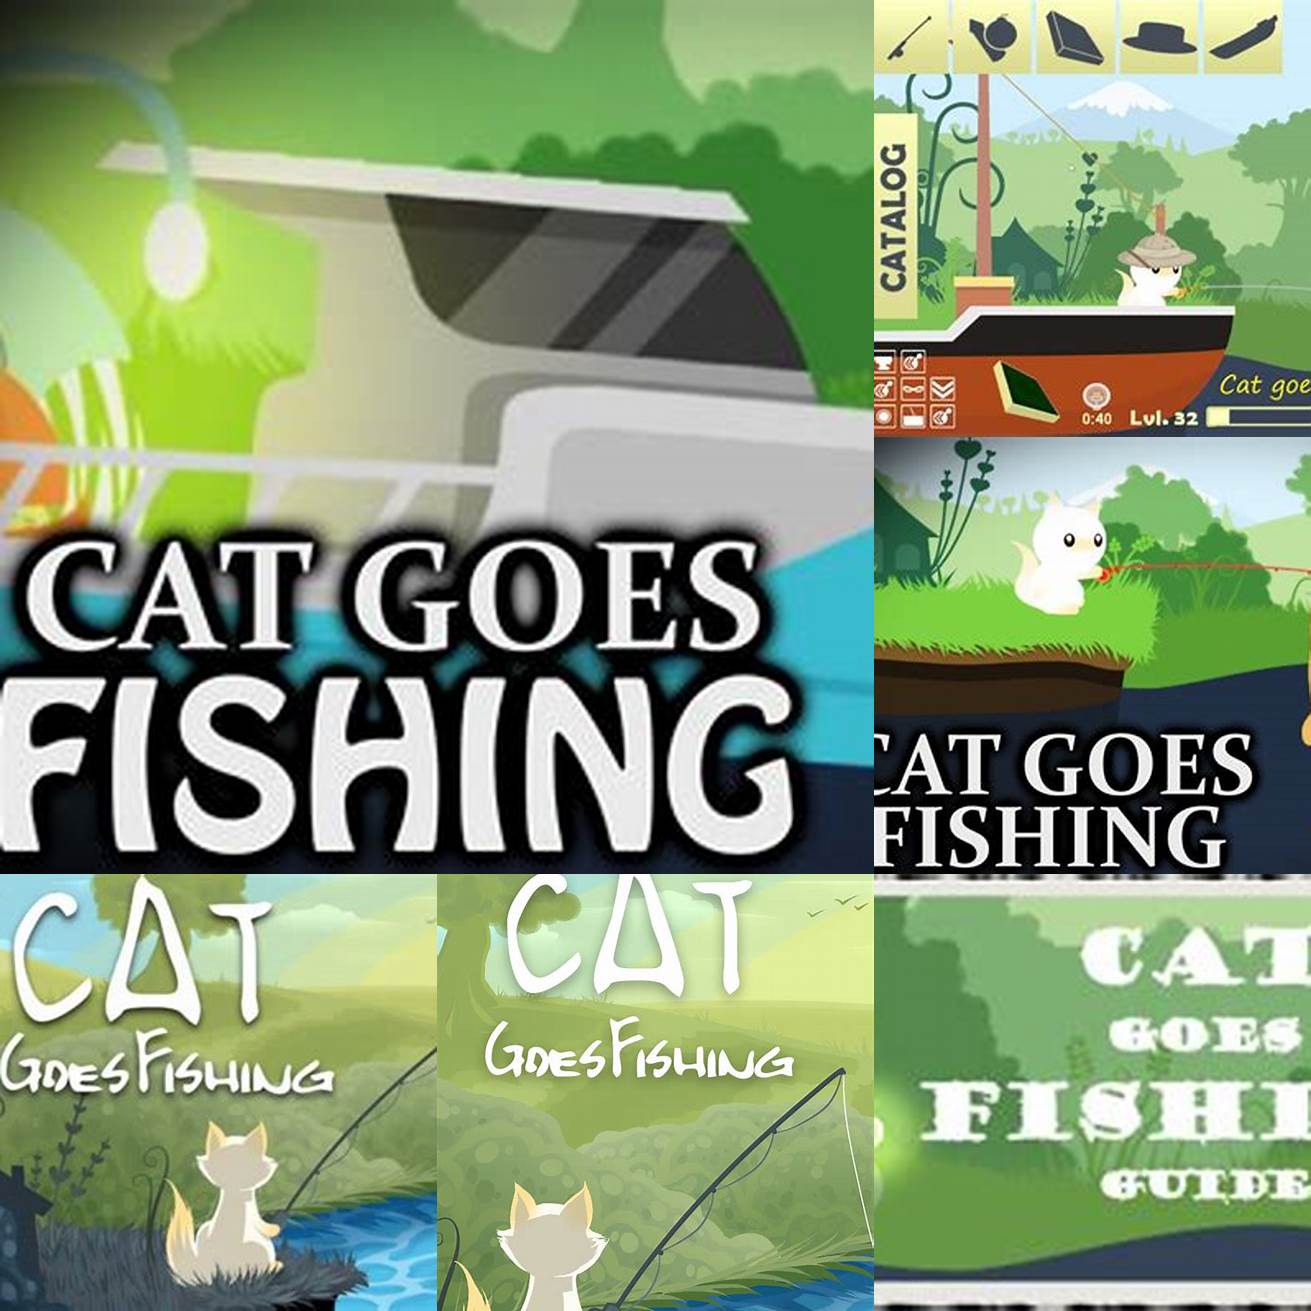 Step 1 Go to the Cat Goes Fishing website